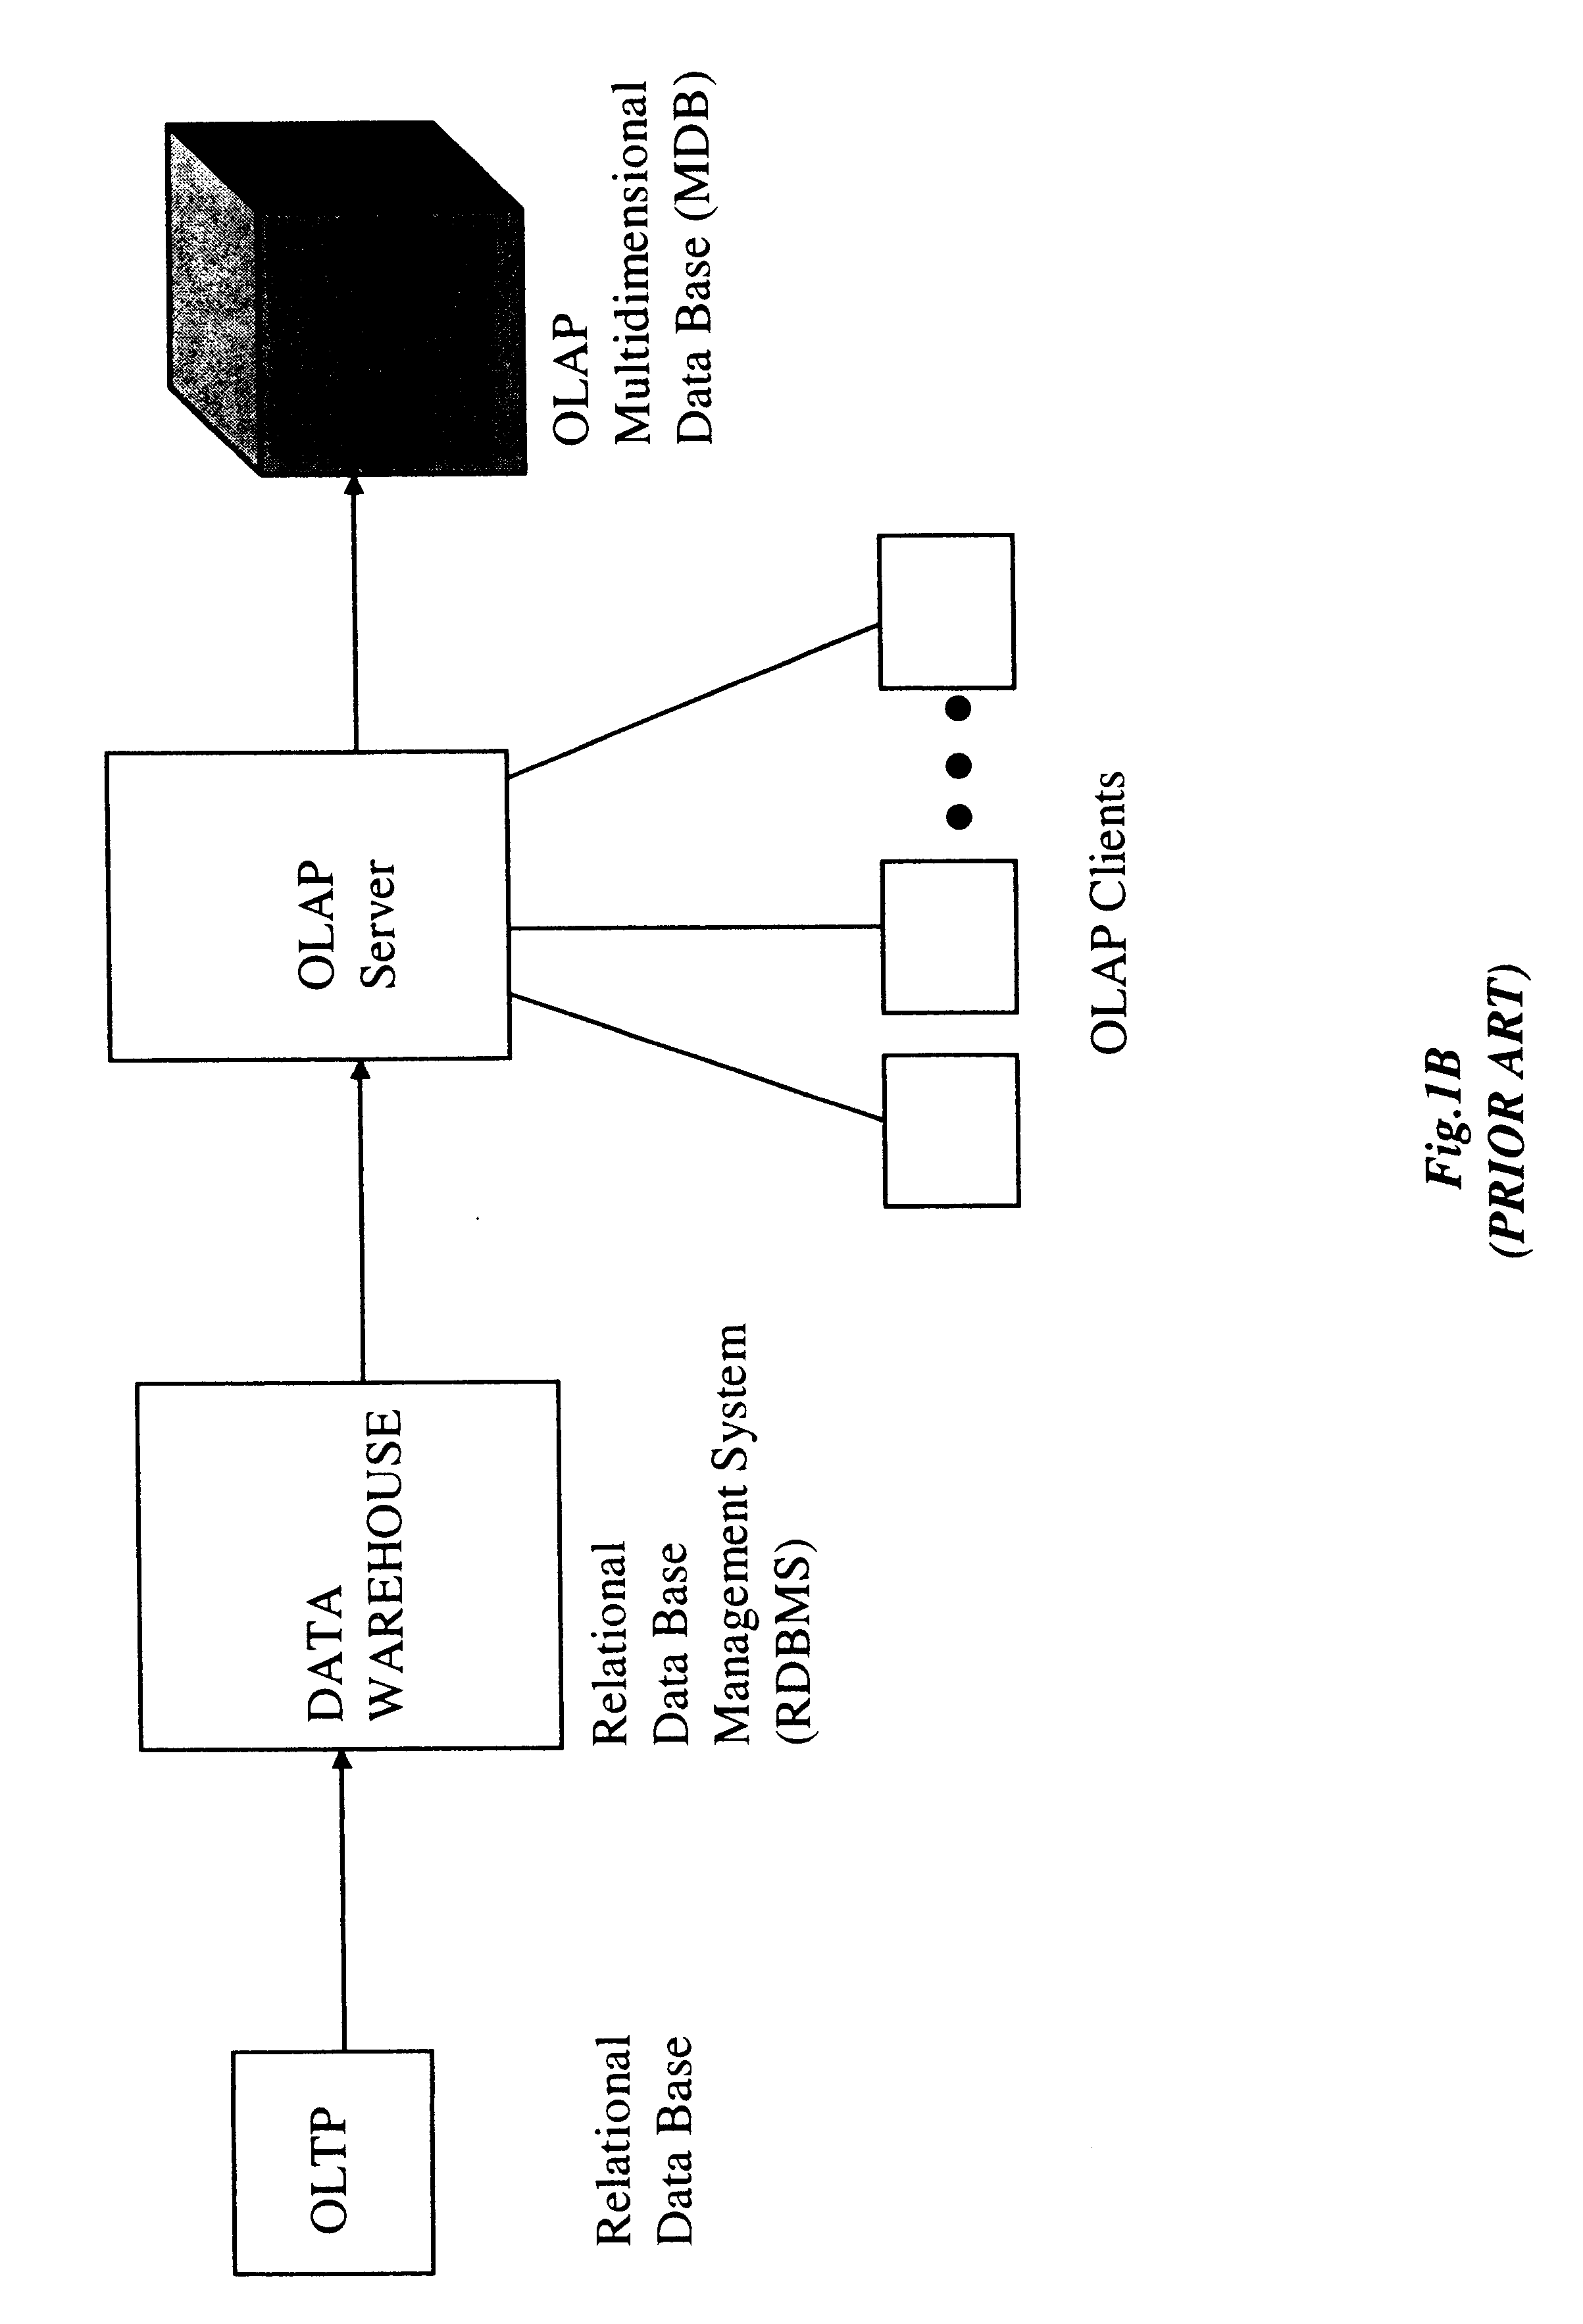 Method of and system for managing multi-dimensional databases using modular-arithmetic based address data mapping processes on integer-encoded business dimensions